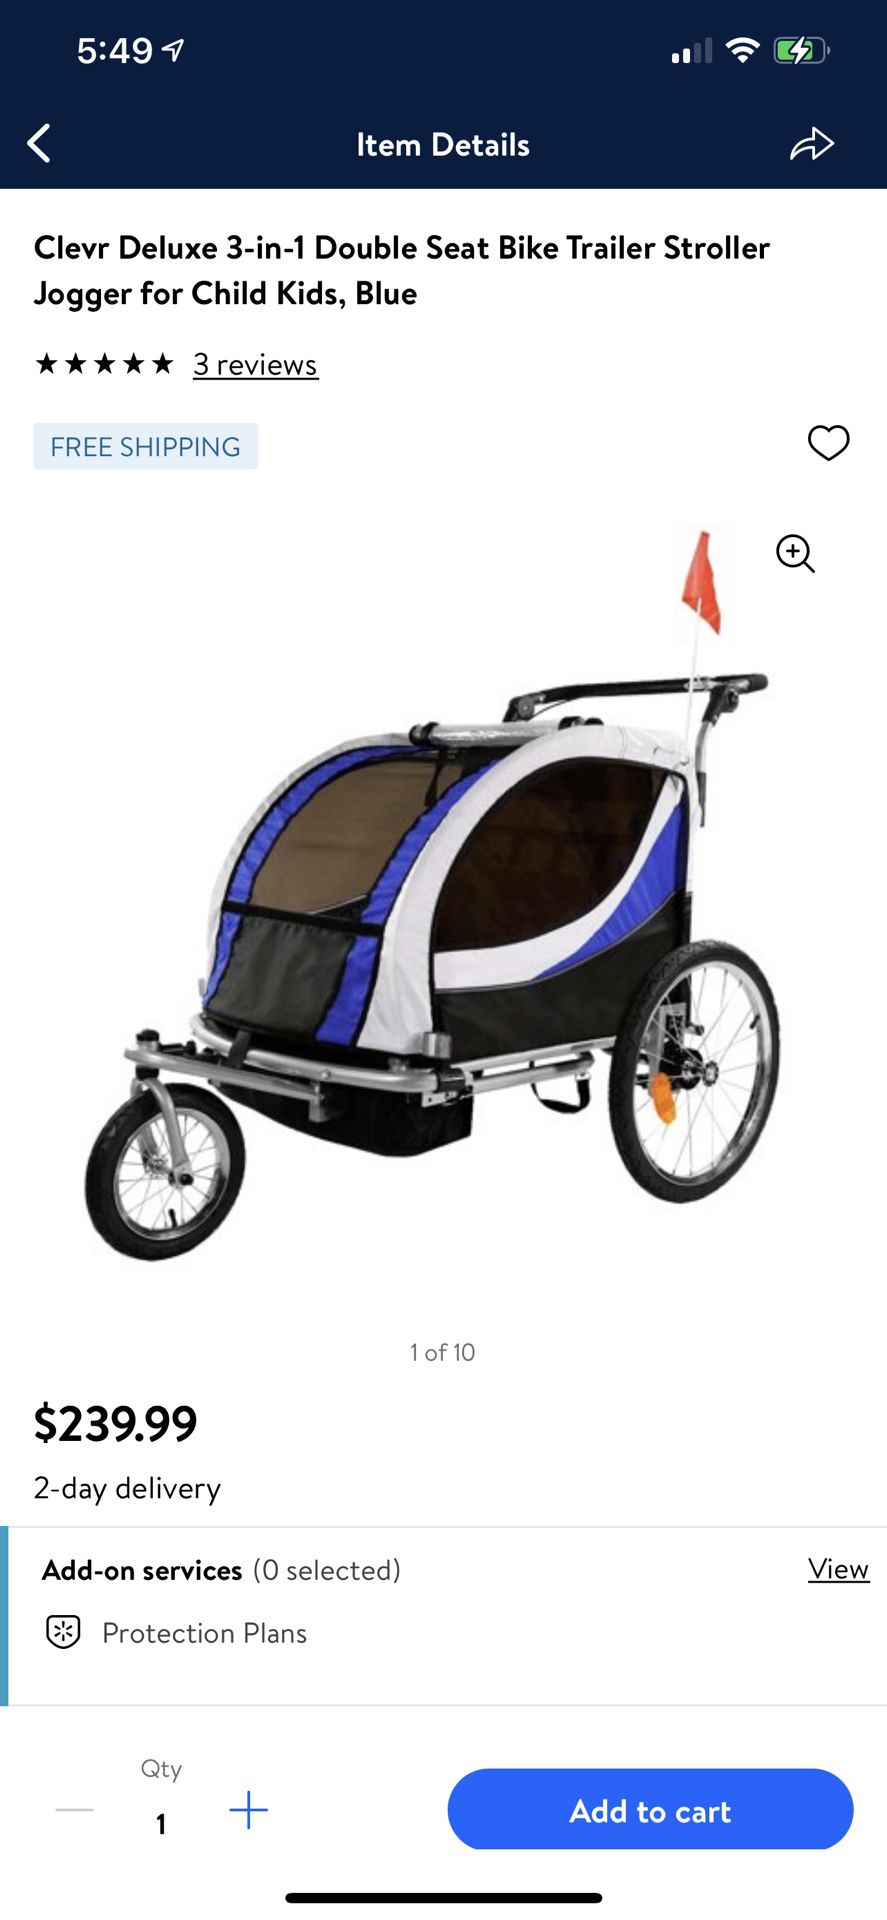 Clevr Deluxe 3-in-1 Double Seat Bike Trailer Stroller Jogger for Child Kids, Blue